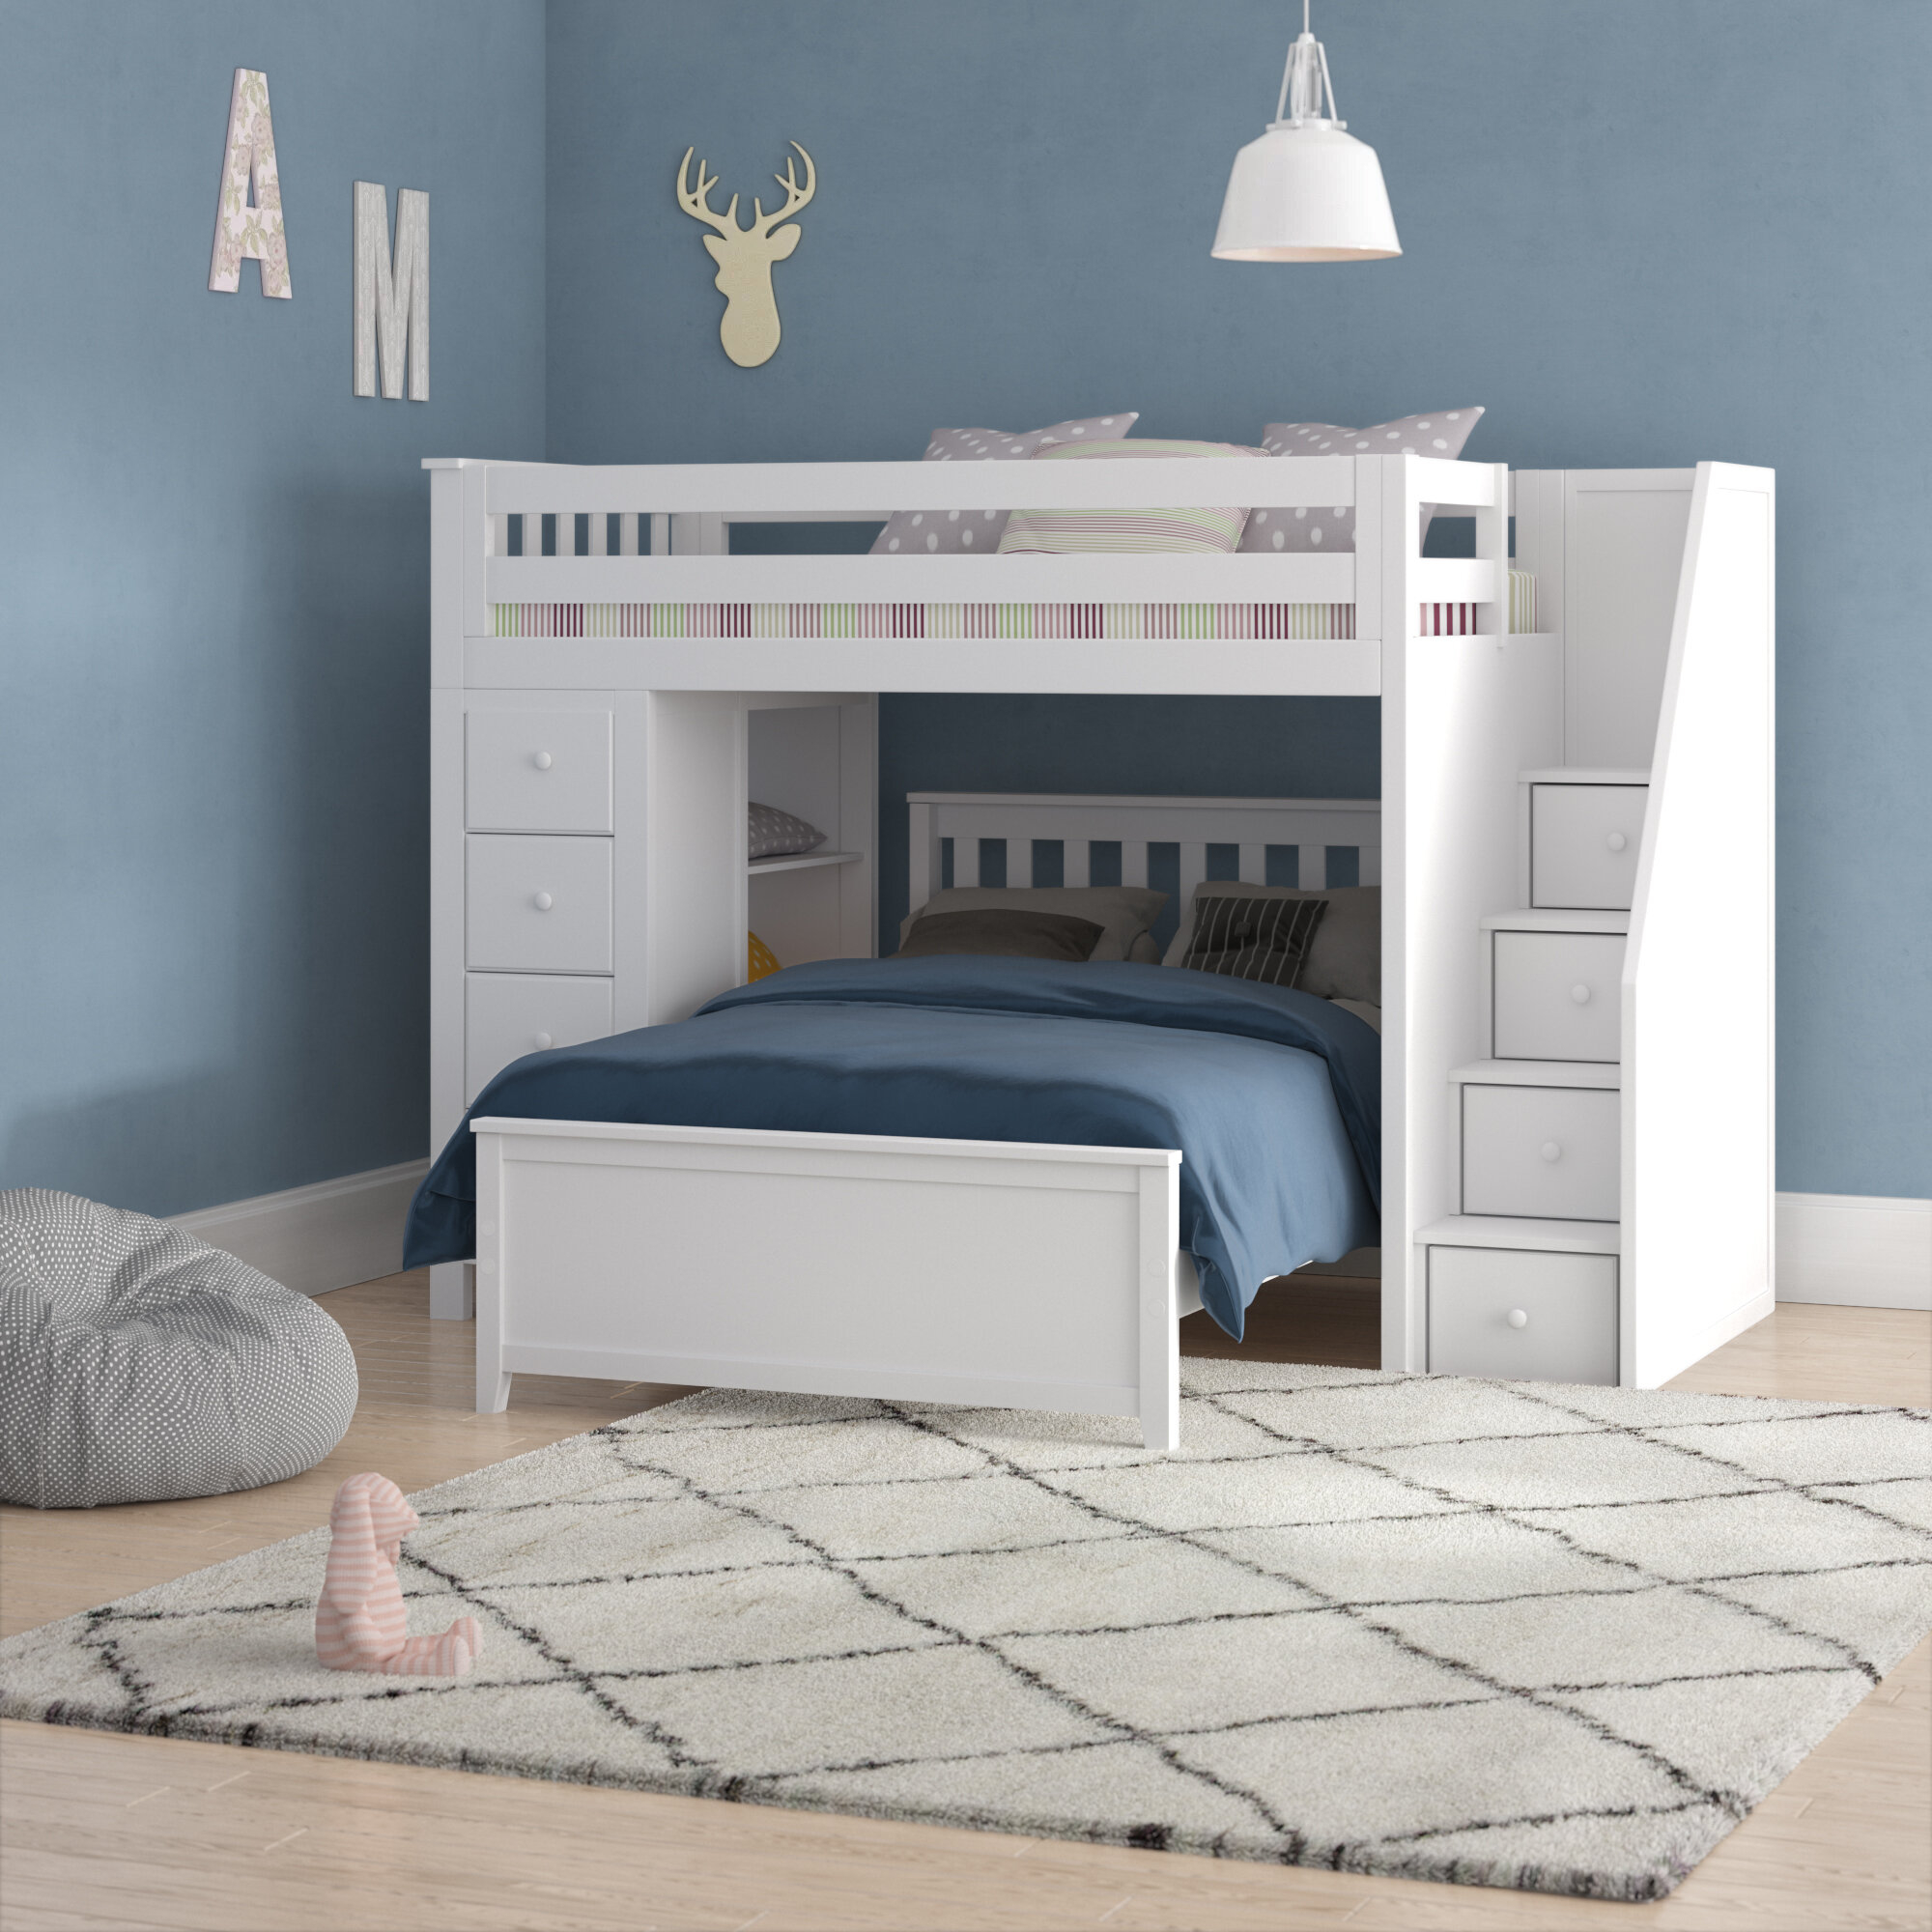 Bunk Beds With Dressers Visualhunt, T Shaped Bunk Beds